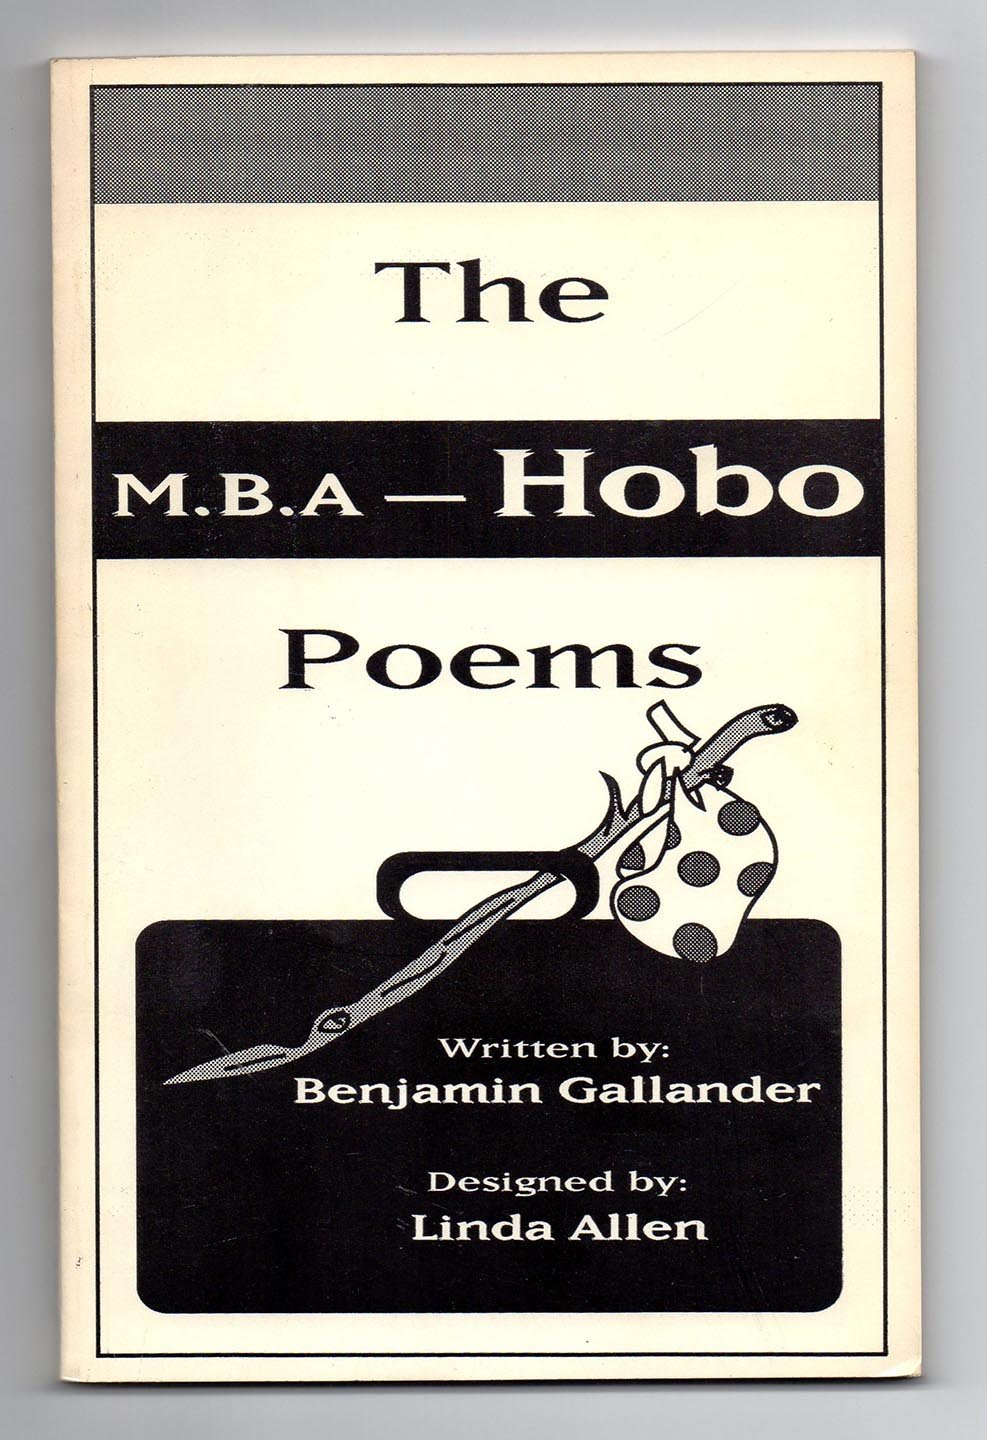 The M.B.A. - Hobo Poems